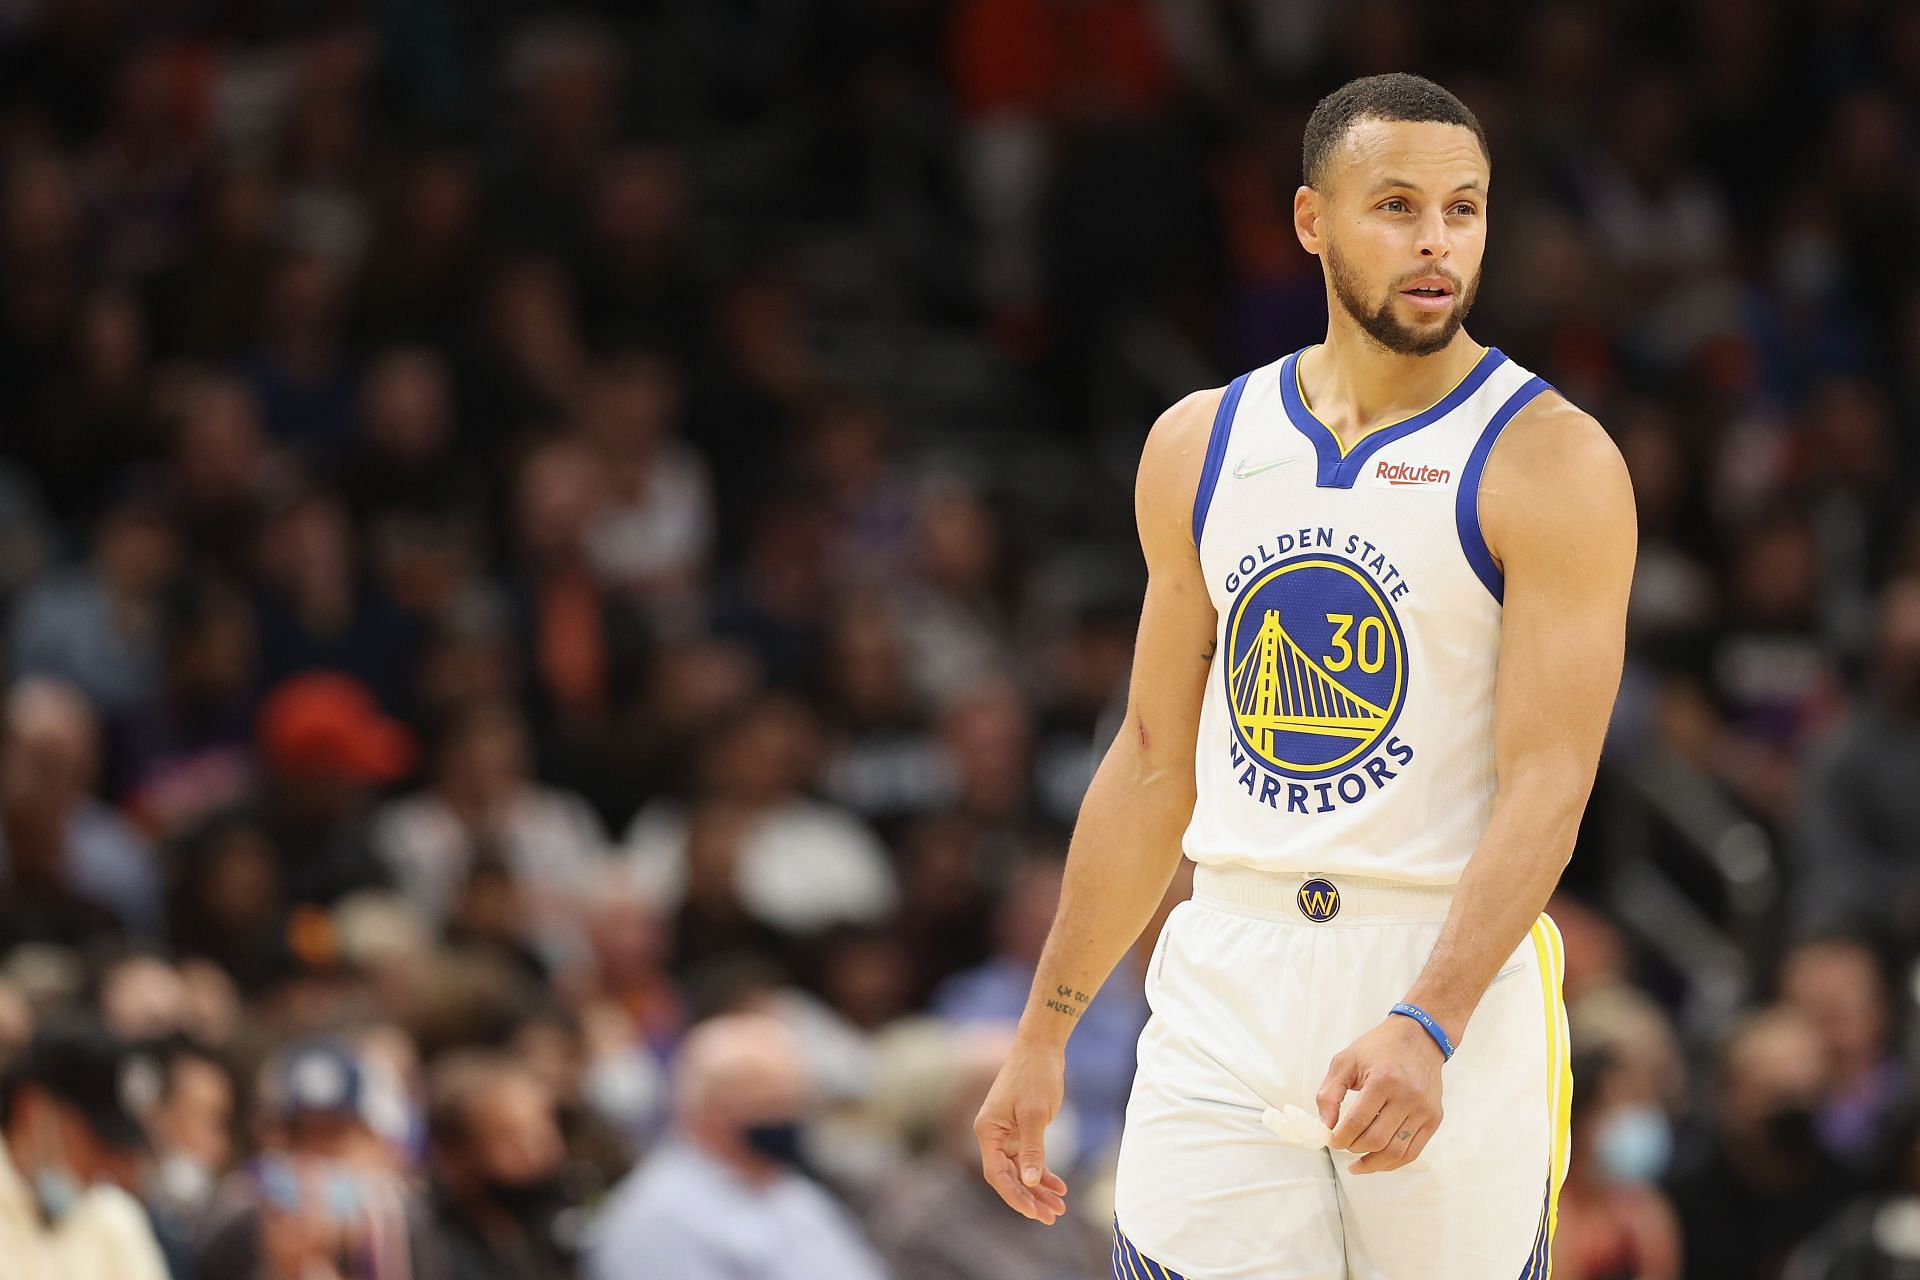 Stephen Curry of the Golden State Warriors game on Nov. 30, 2021 in Phoenix, Arizona.